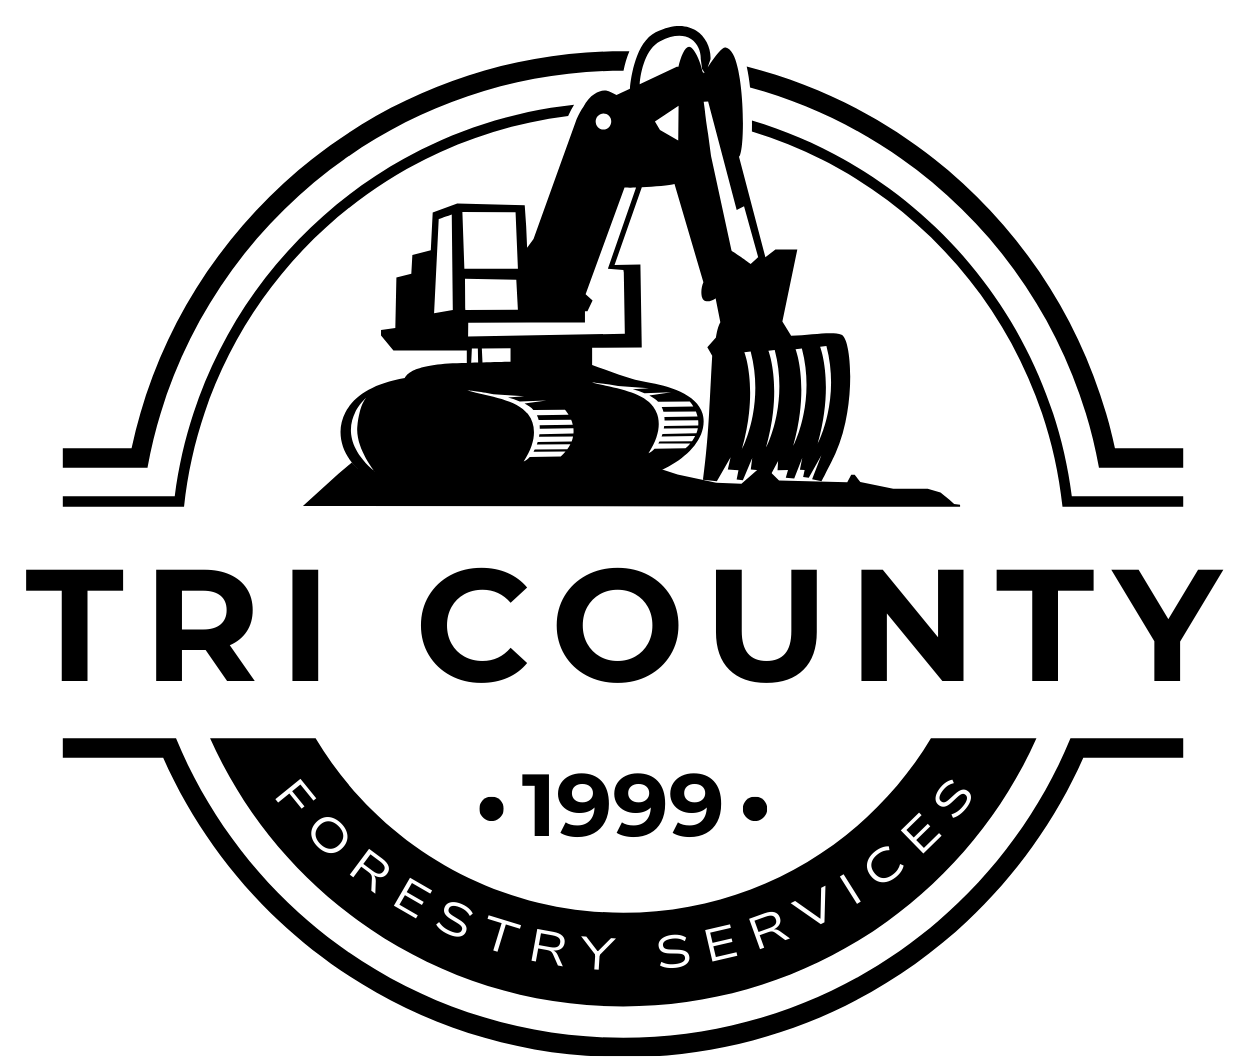 Tri County Forestry Services logo